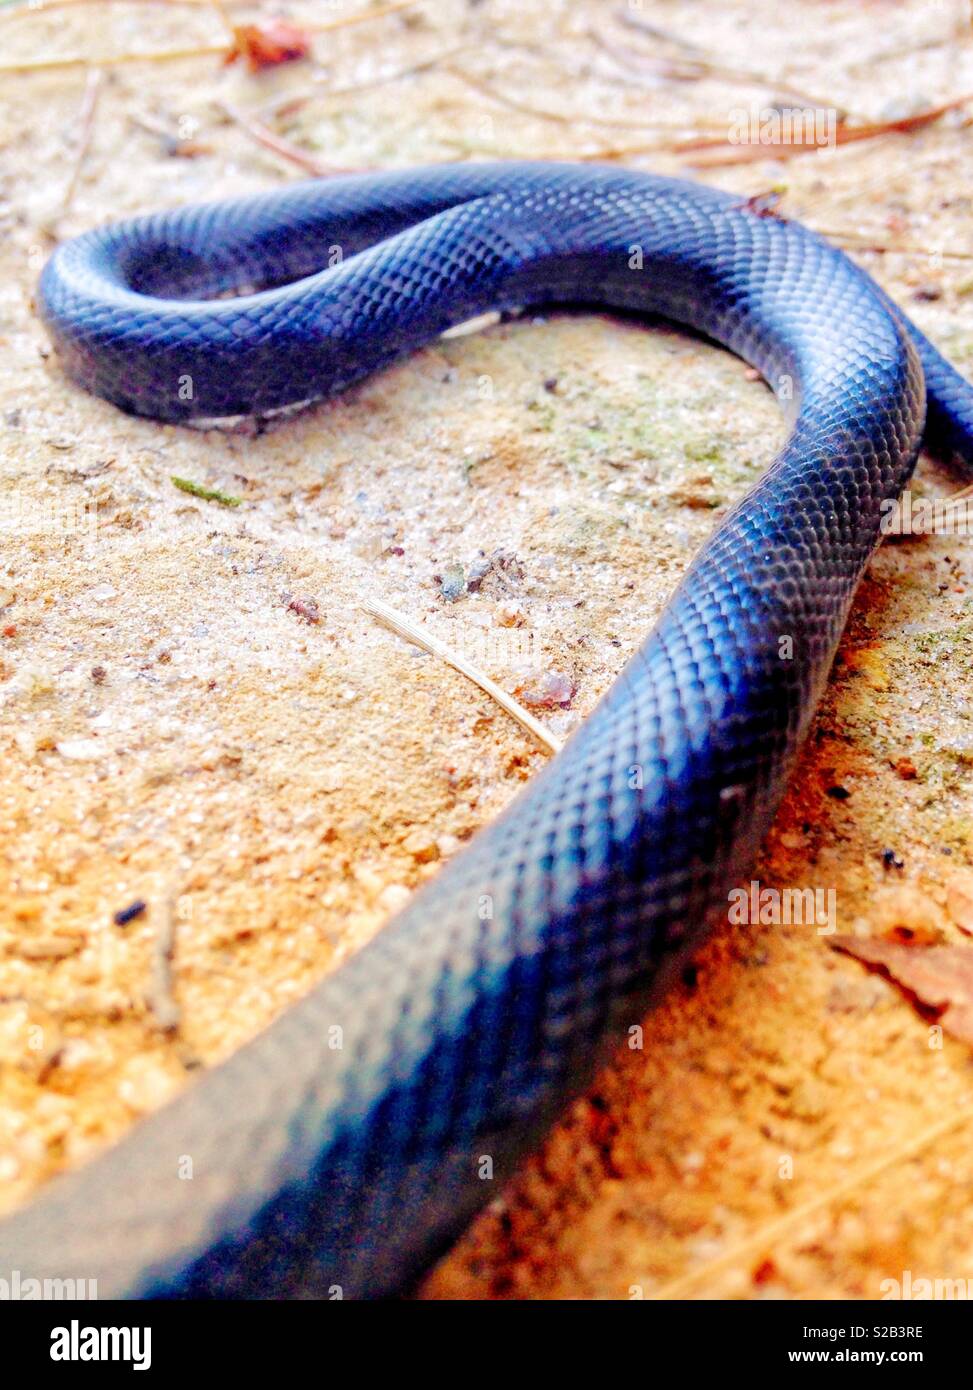 Sunlit photo of a black snake on a dirt road Stock Photo